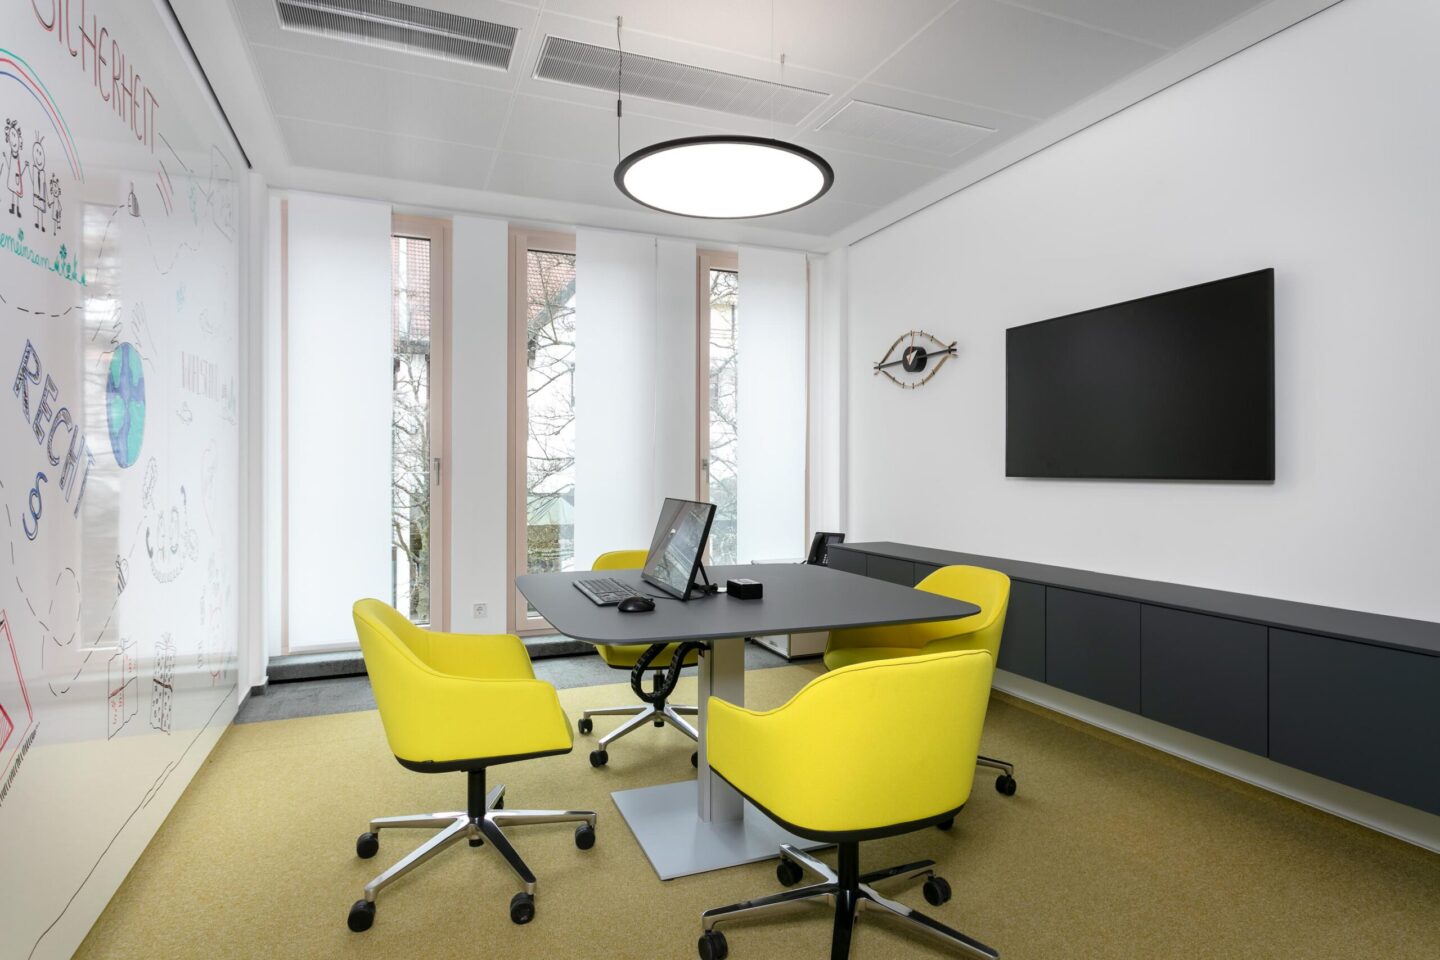 Sparkasse Bühl – Main Office │ modern meeting rooms │ lounge areas │ flexible furnishing